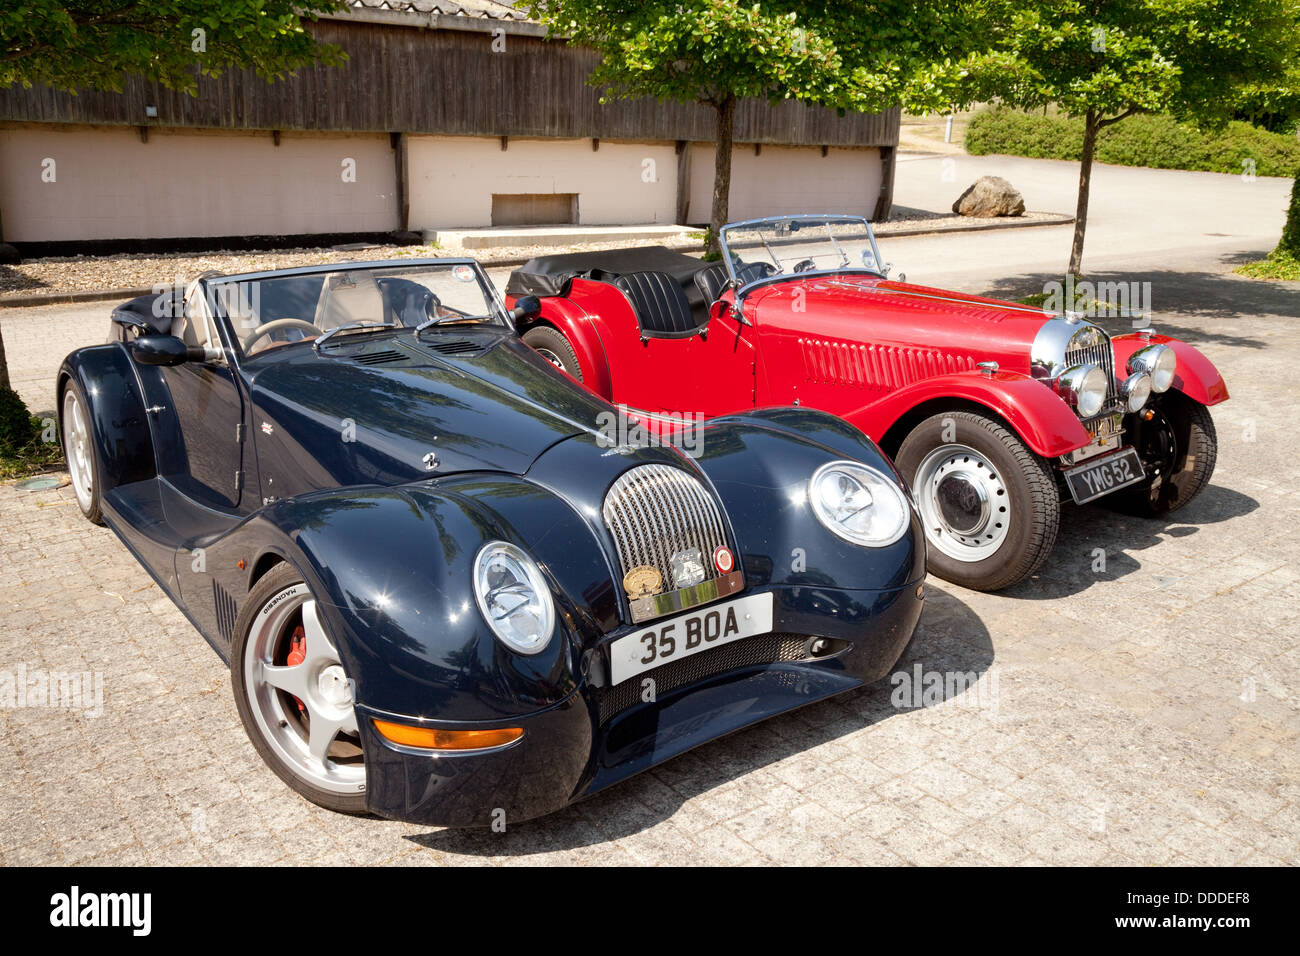 A pair of Morgan sports cars, a modern Aero 8 sports coupe, and an older Morgan, at an owners club rally, Lambourn, Berkshire UK Stock Photo